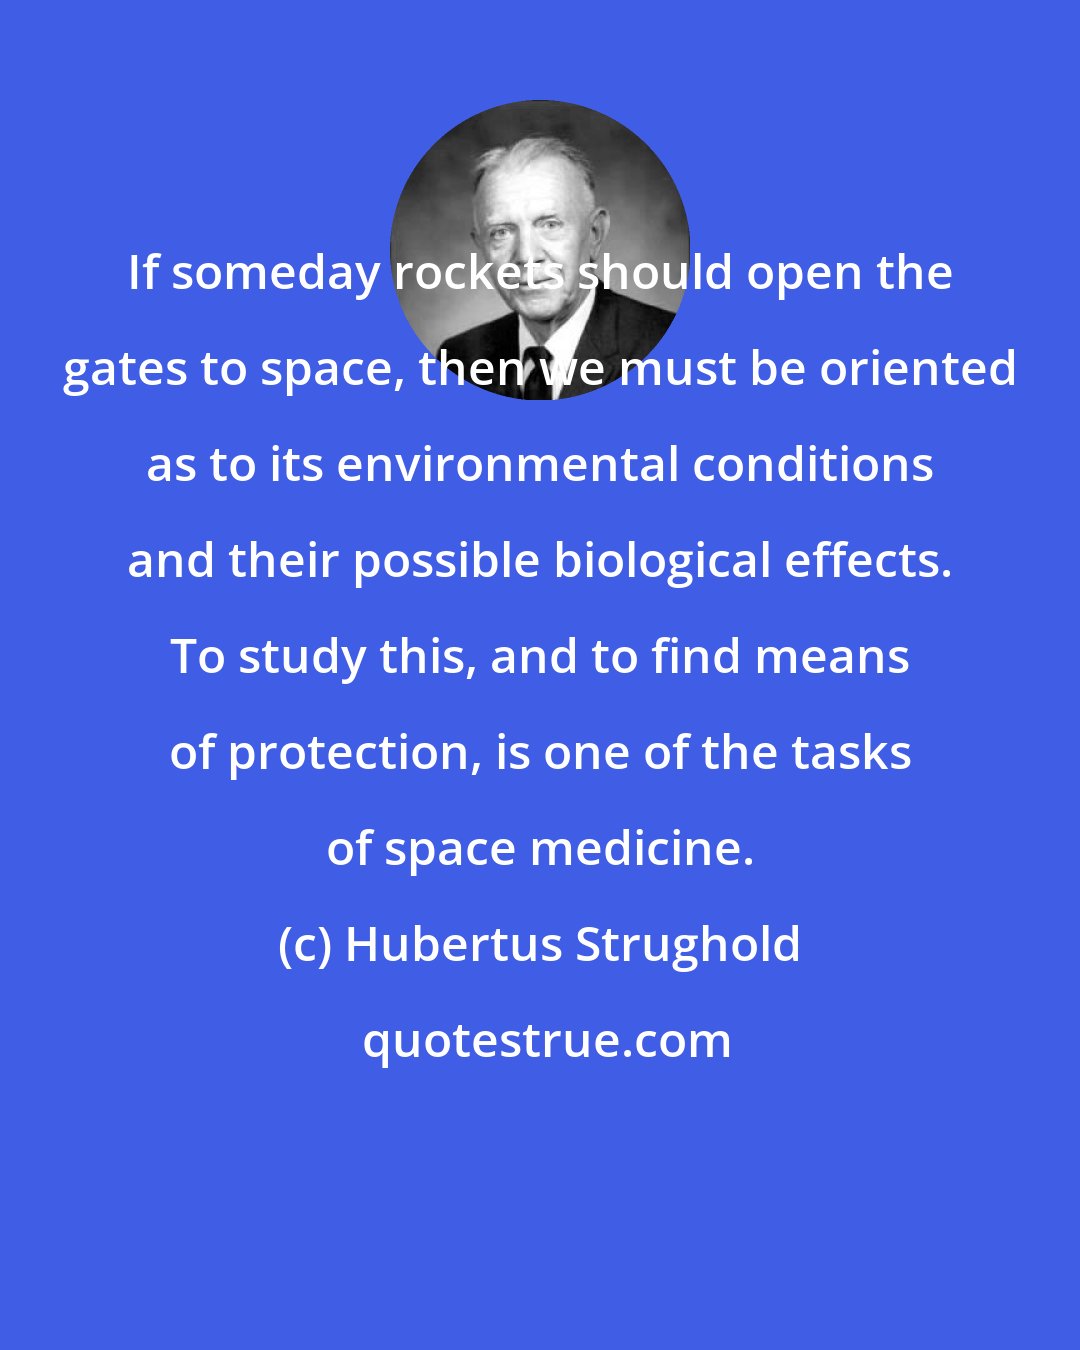 Hubertus Strughold: If someday rockets should open the gates to space, then we must be oriented as to its environmental conditions and their possible biological effects. To study this, and to find means of protection, is one of the tasks of space medicine.